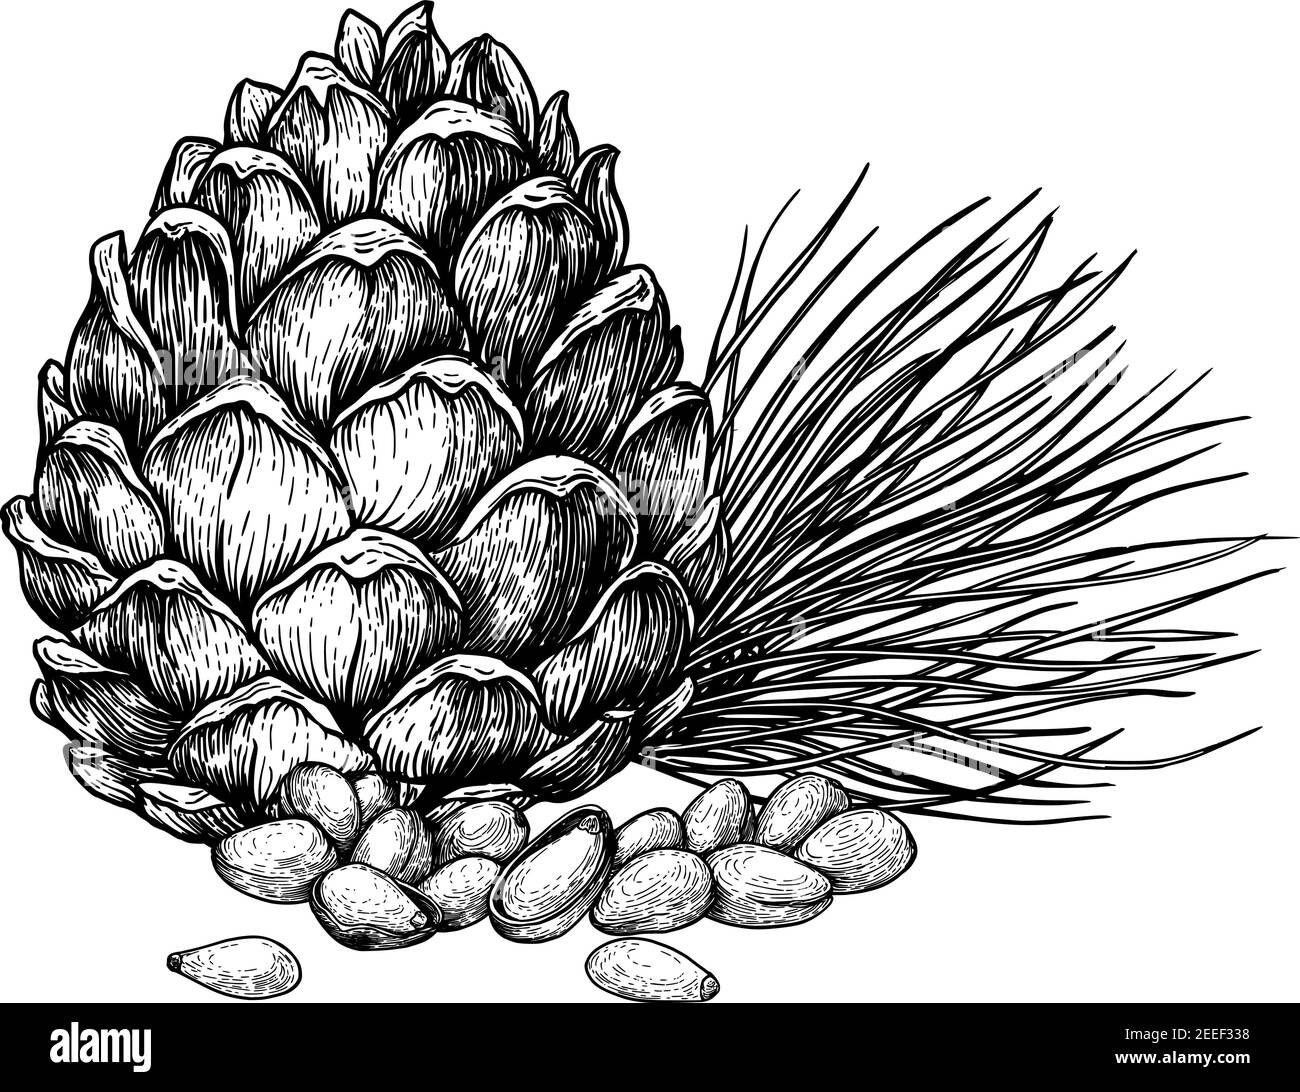 Pine nuts and cones. Hand drawn sketches vector illustration on white background in vintage style. Stock Vector